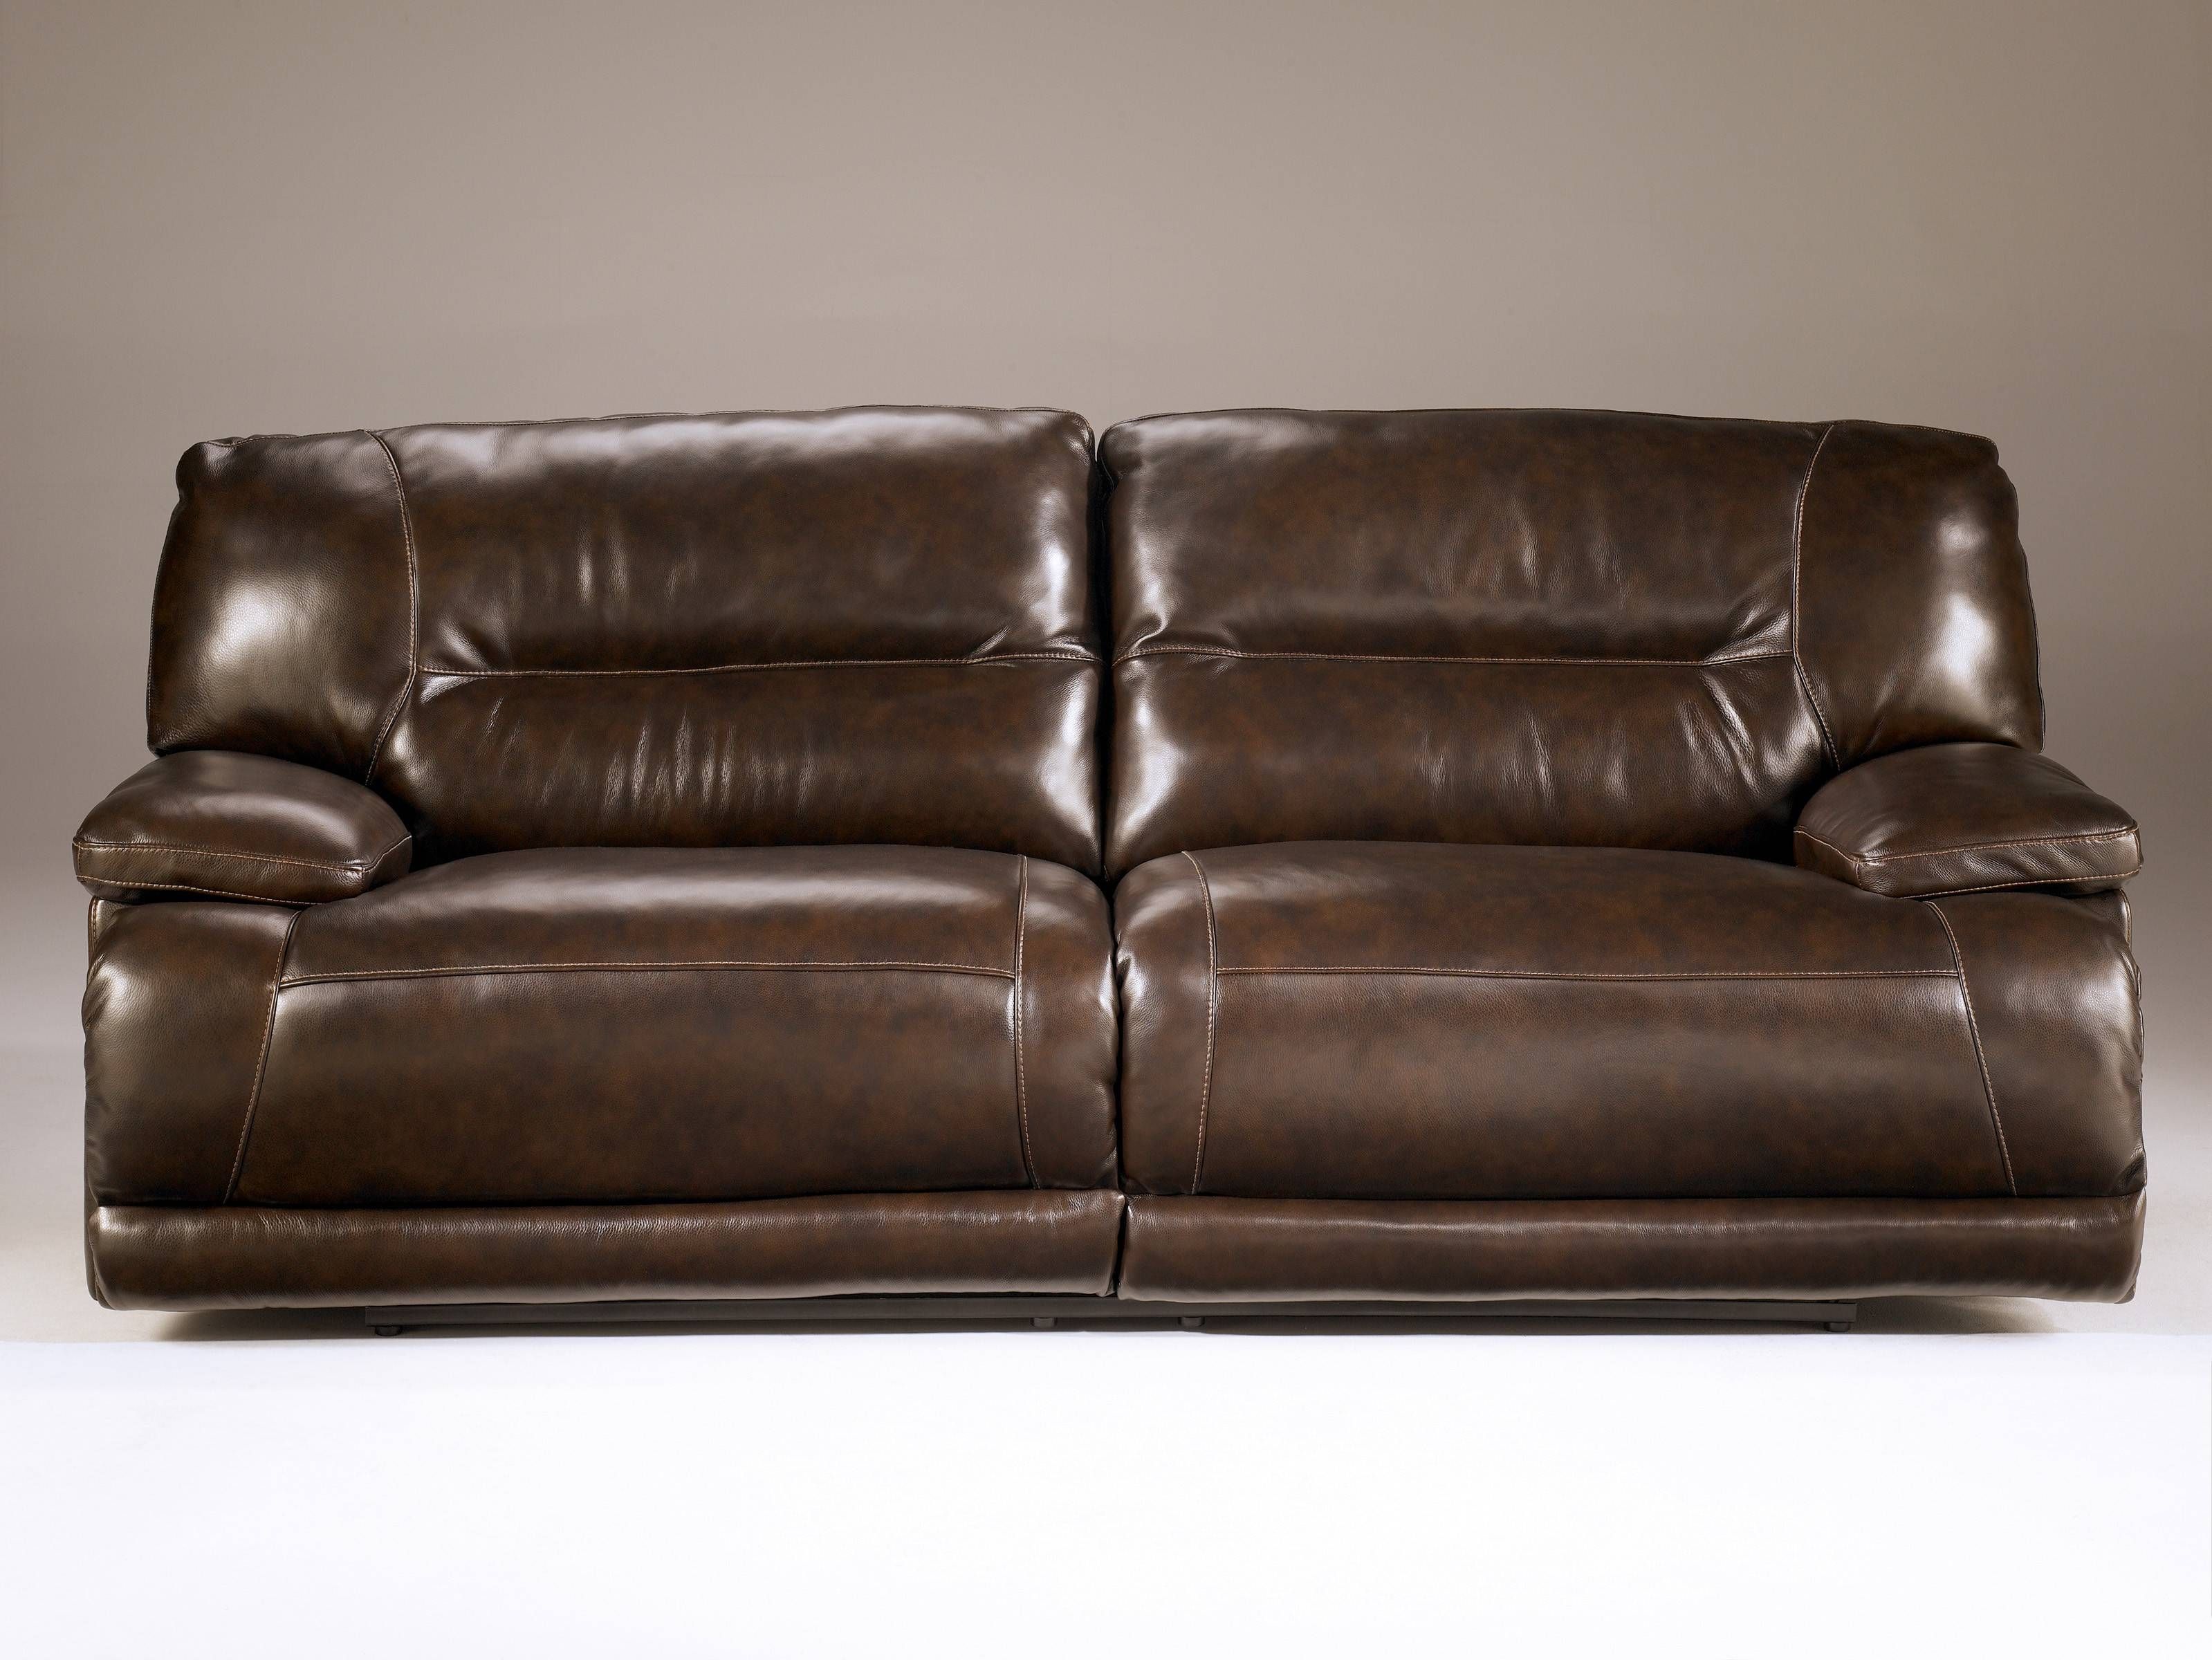 Exhilaration – Chocolate 42401 2 – Seat Power Reclining Sofa Intended For 2 Seat Recliner Sofas (View 29 of 30)